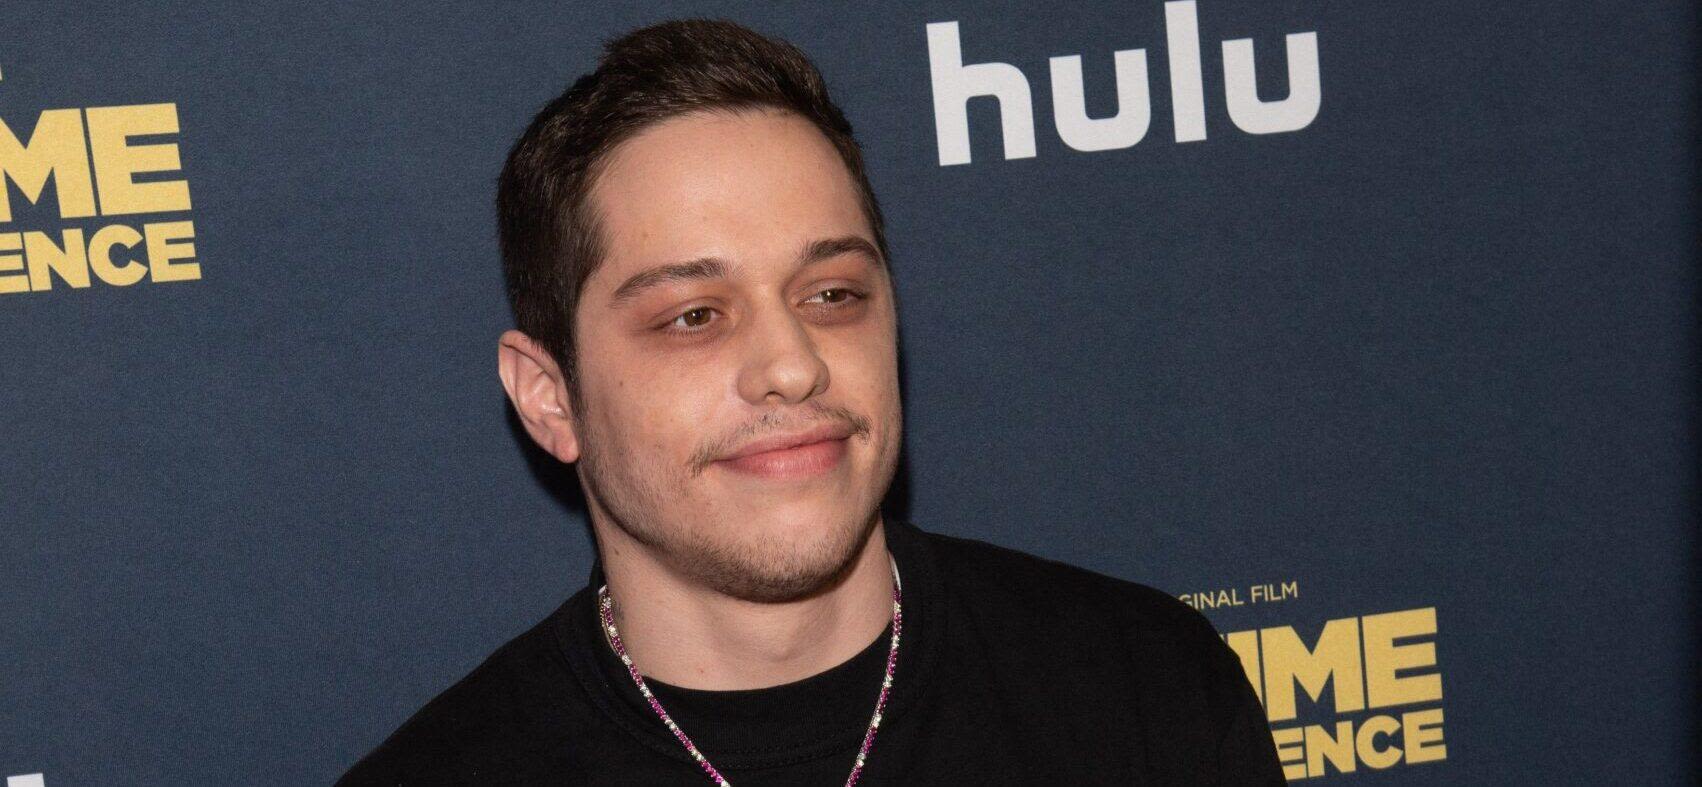 Pete Davidson Talks About His Dismissed Reckless Driving Case And The One Drug He 'Can't Quit'